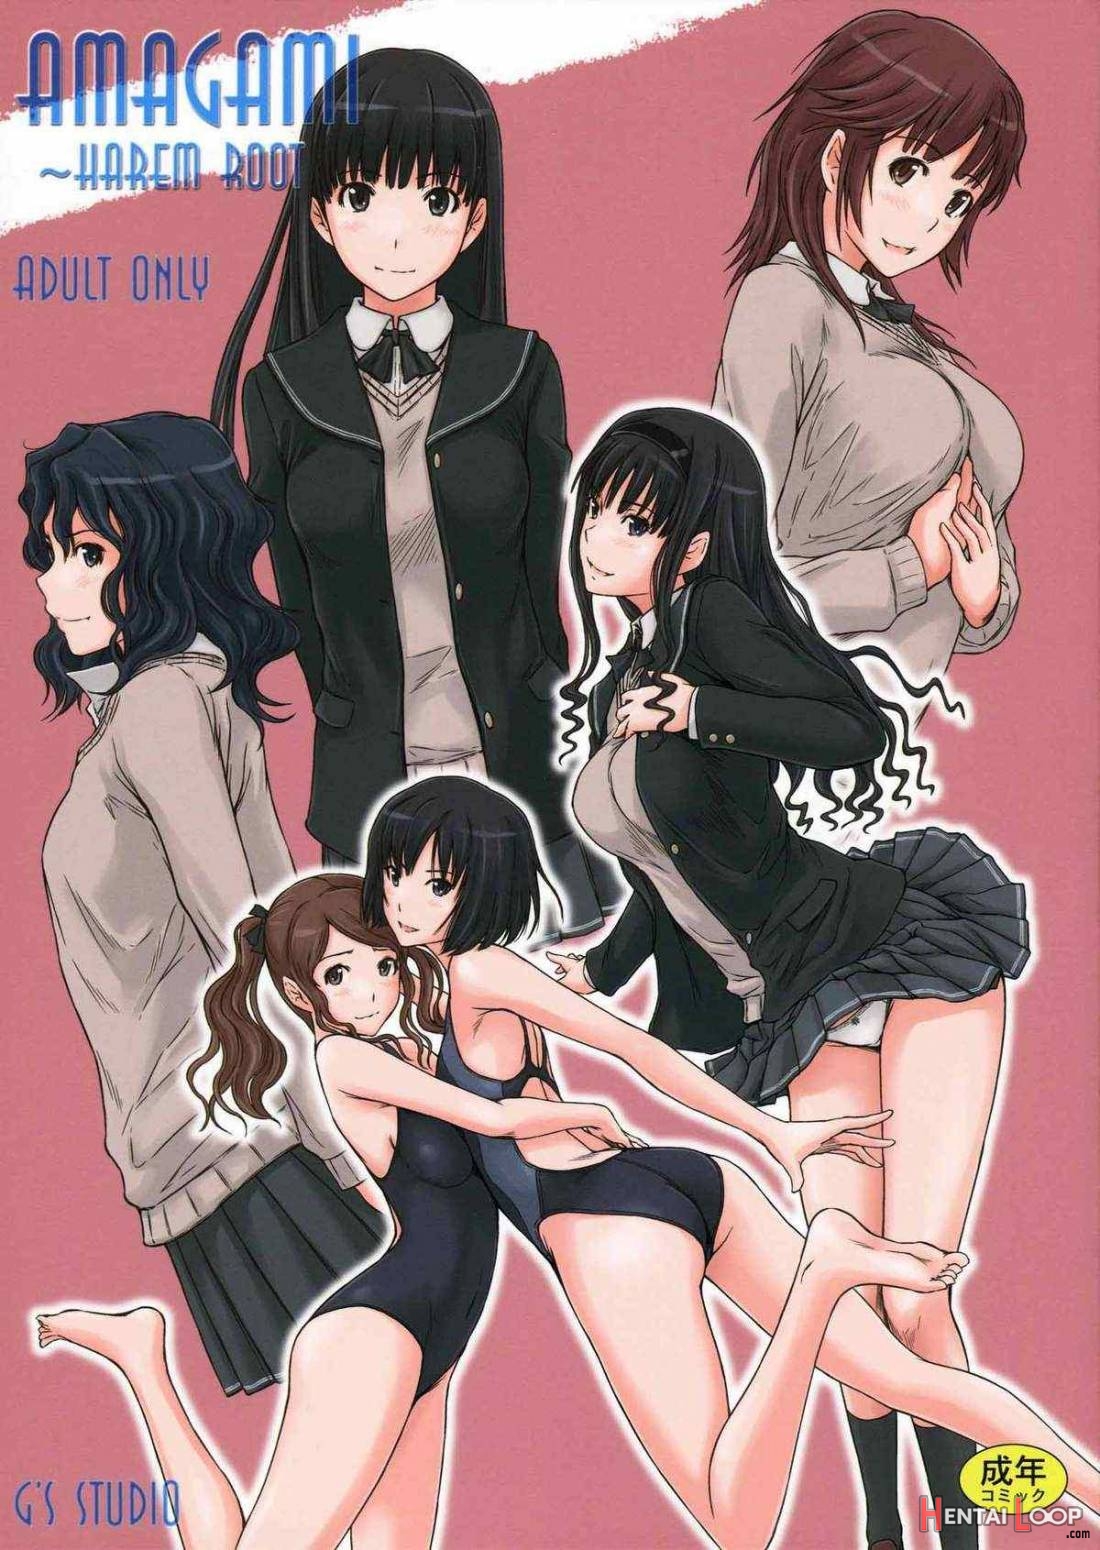 AMAGAMI ~HAREM ROOT page 1